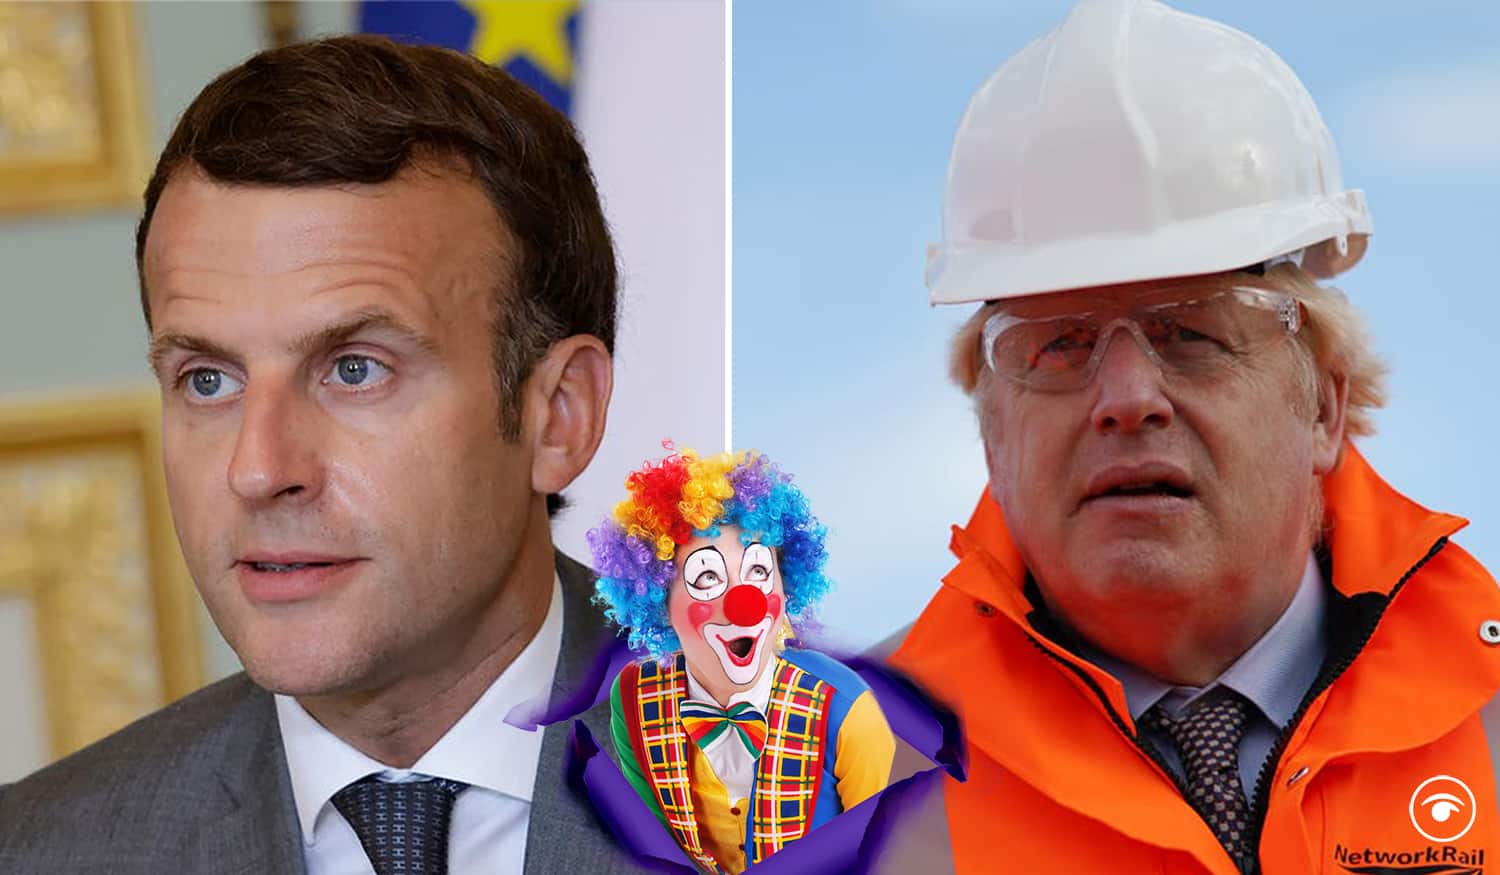 Say what you see? Macron called Boris a clown, French magazine claims